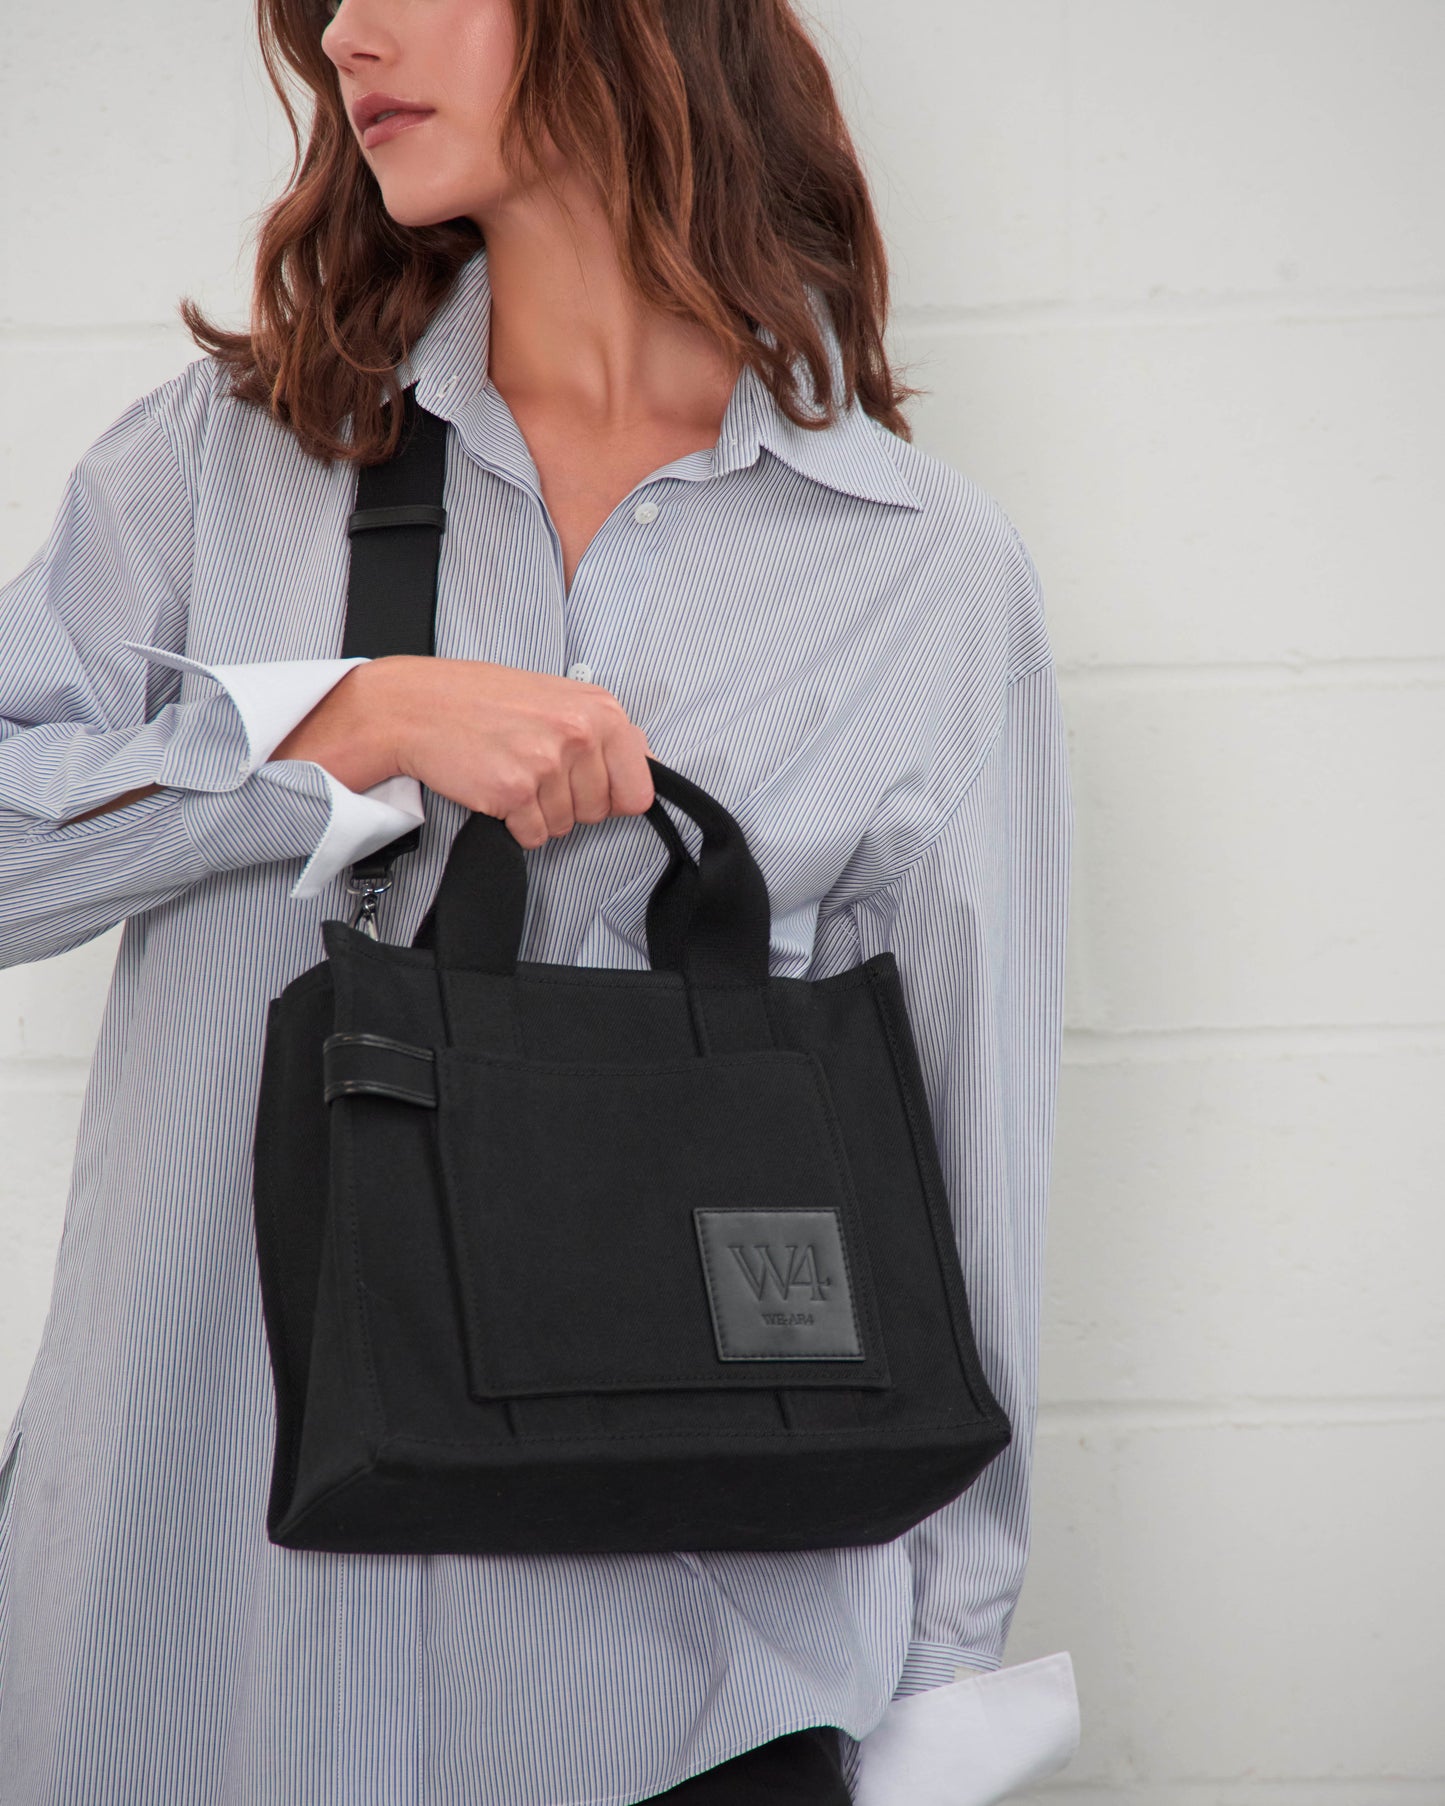 The Street Tote 29